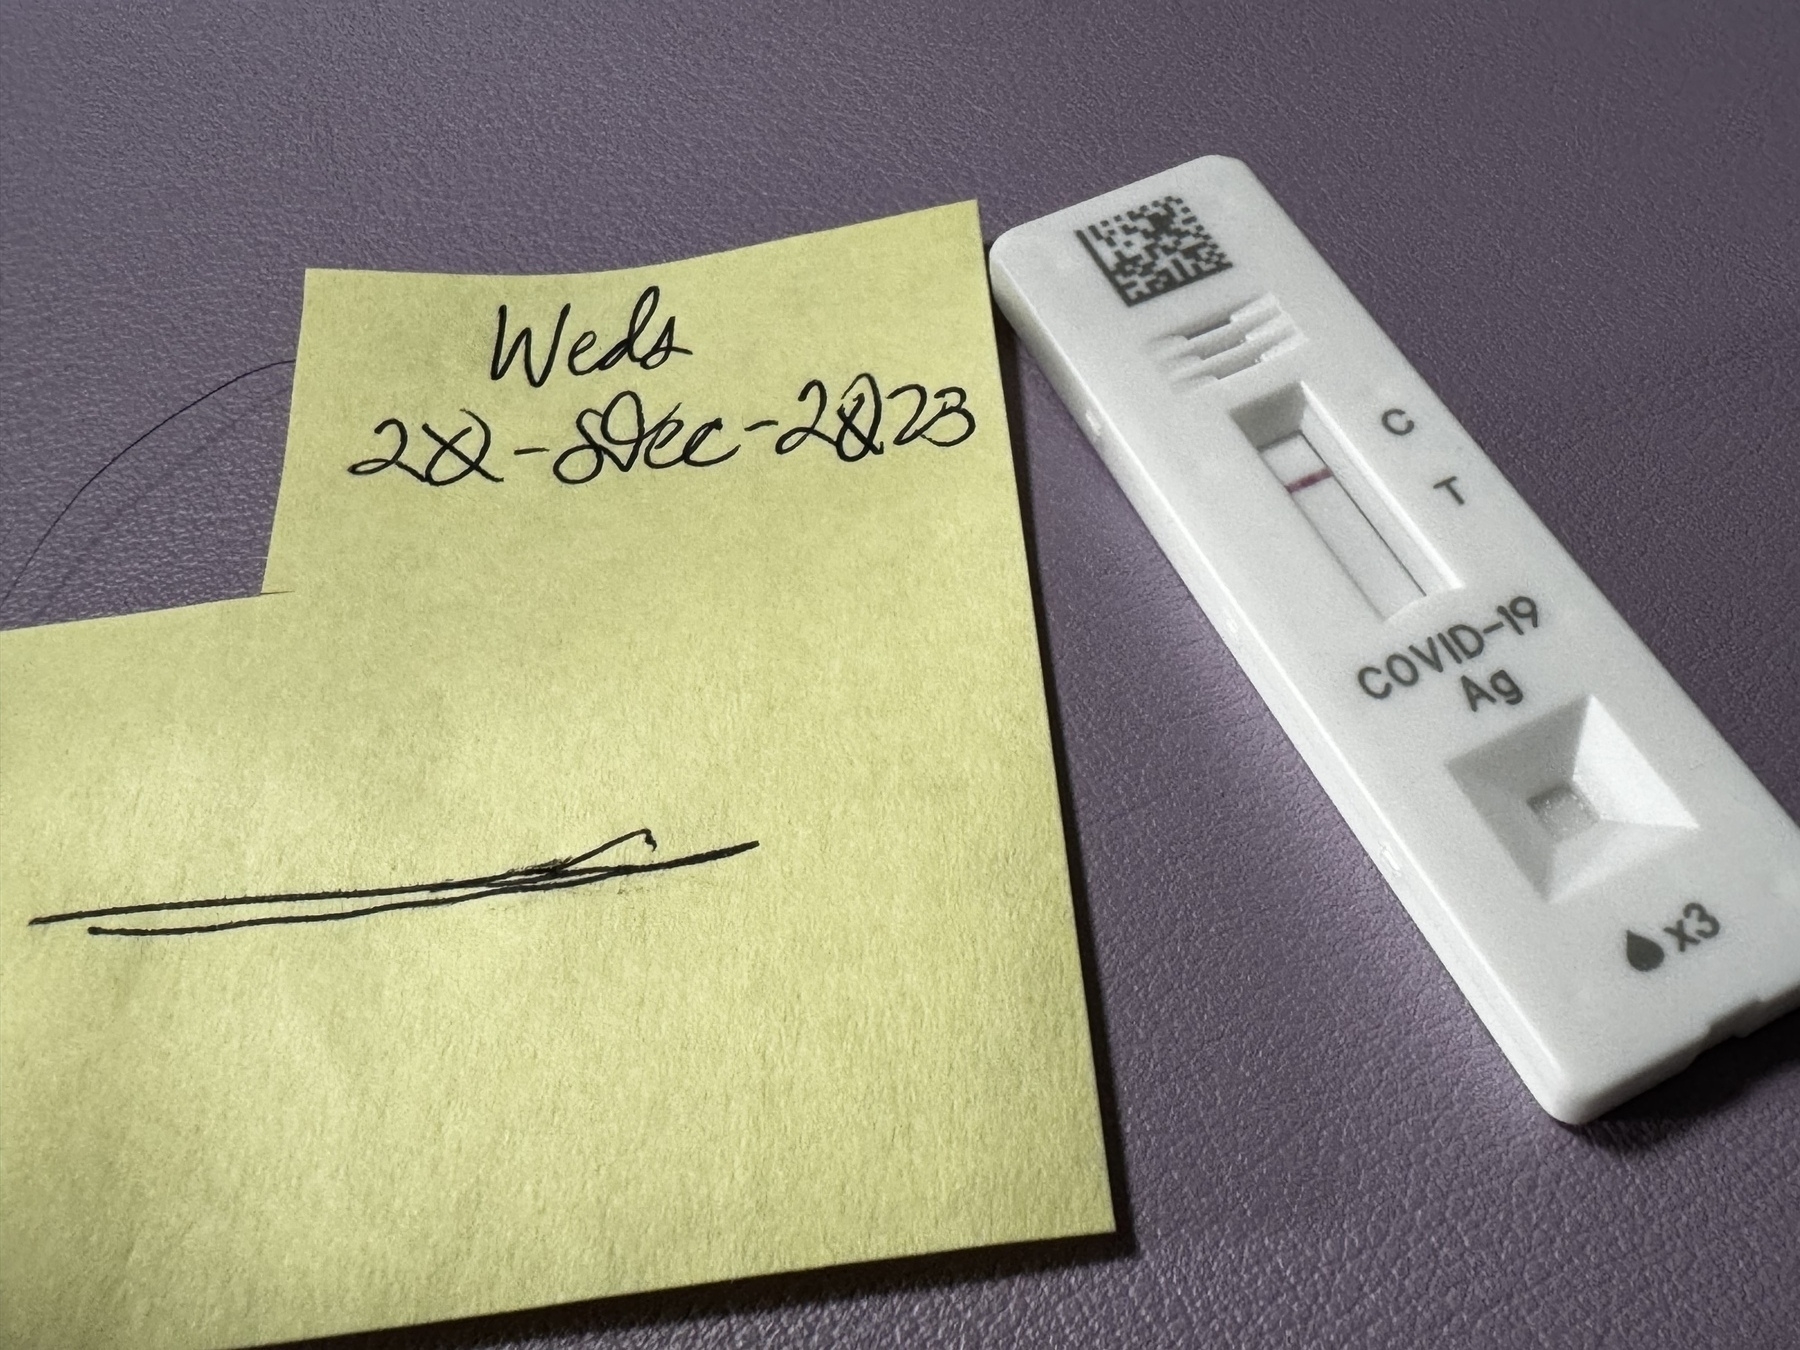 A negative COVID-19 rapid antigen test next to a sticky note with handwritten text.